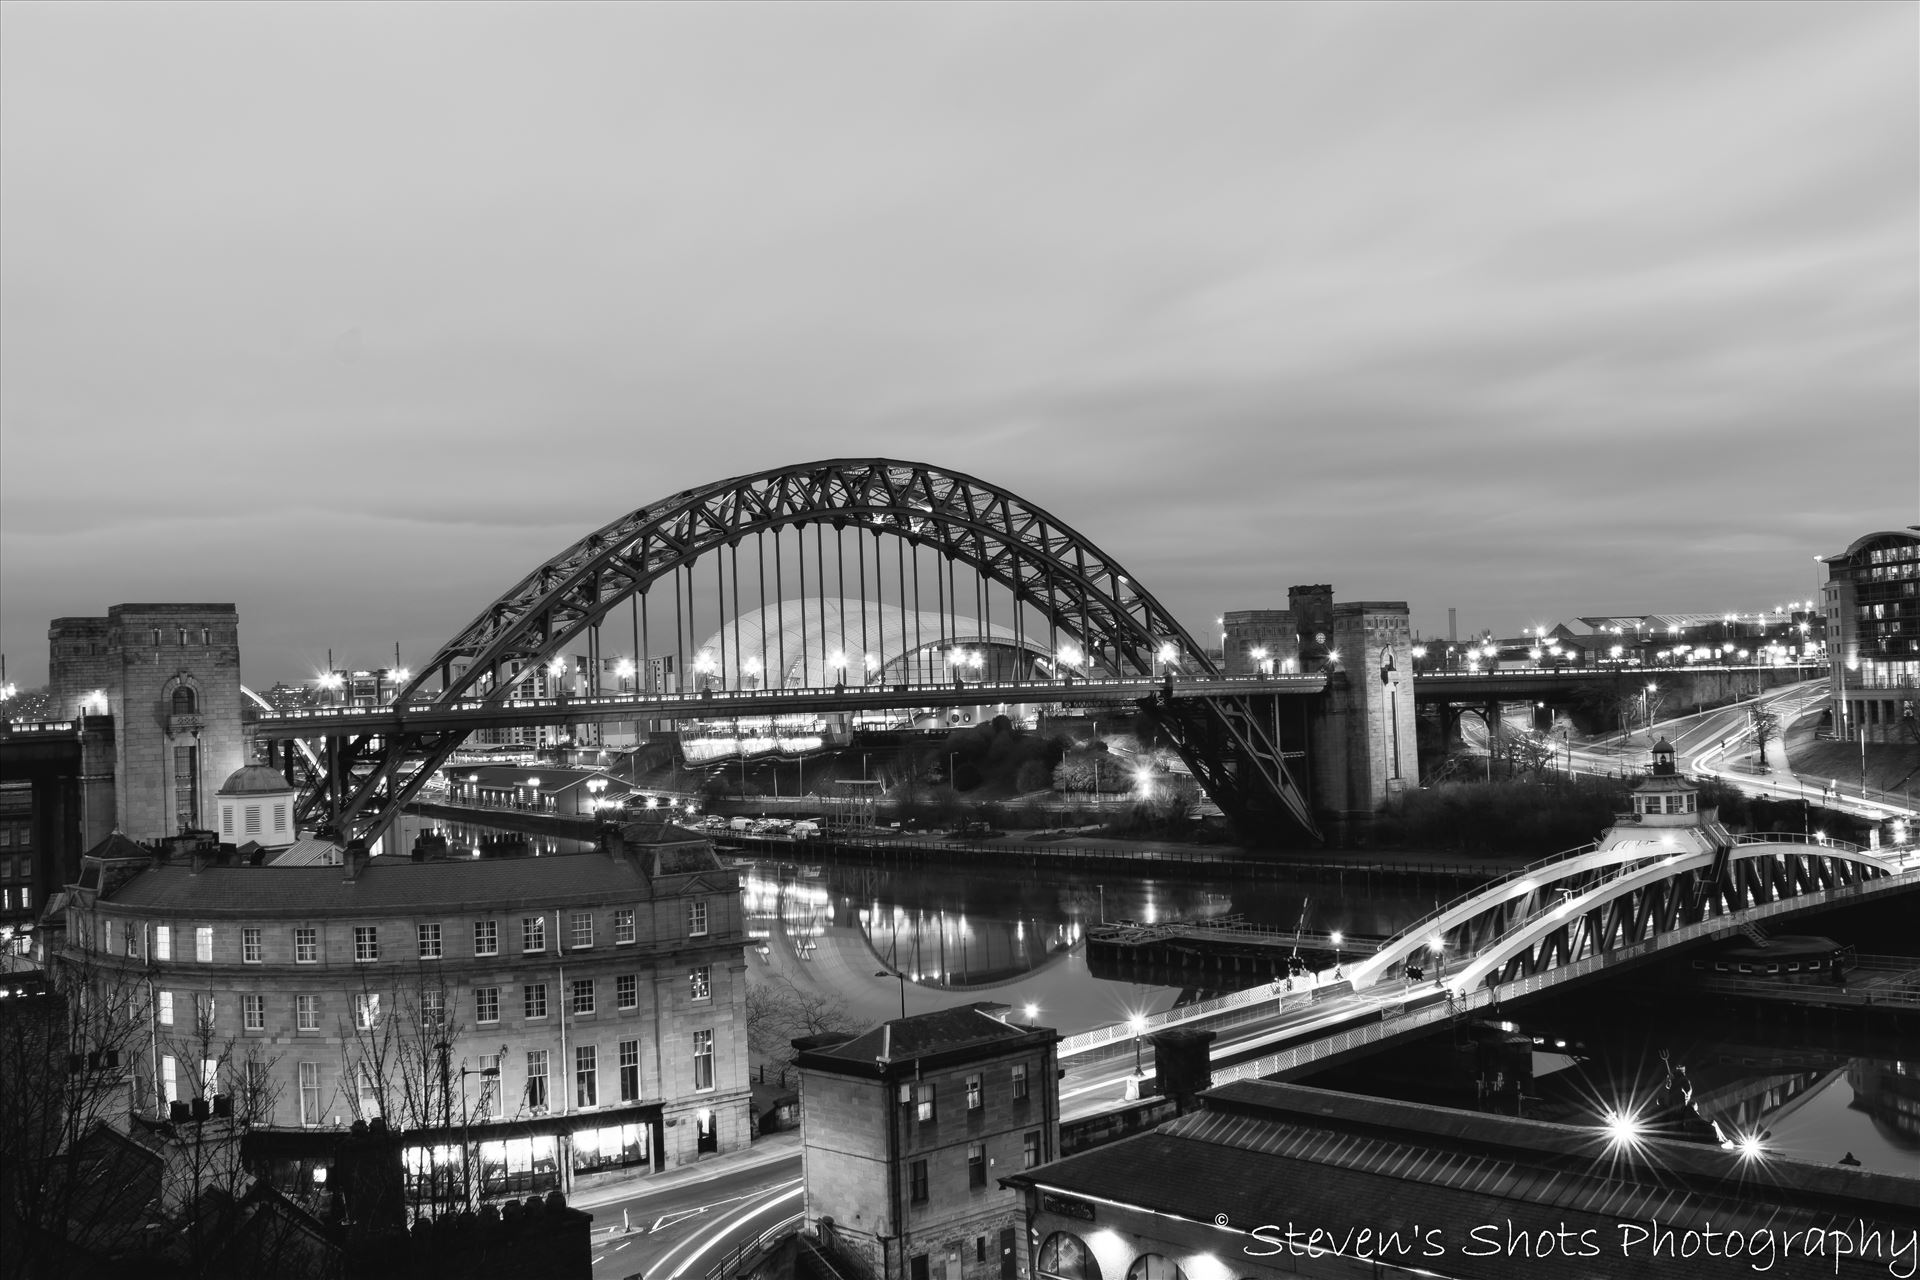 Swing bridge and Tyne bridge in black and white from the high level 6.3.18.jpg -  by Steven's Shots Photography